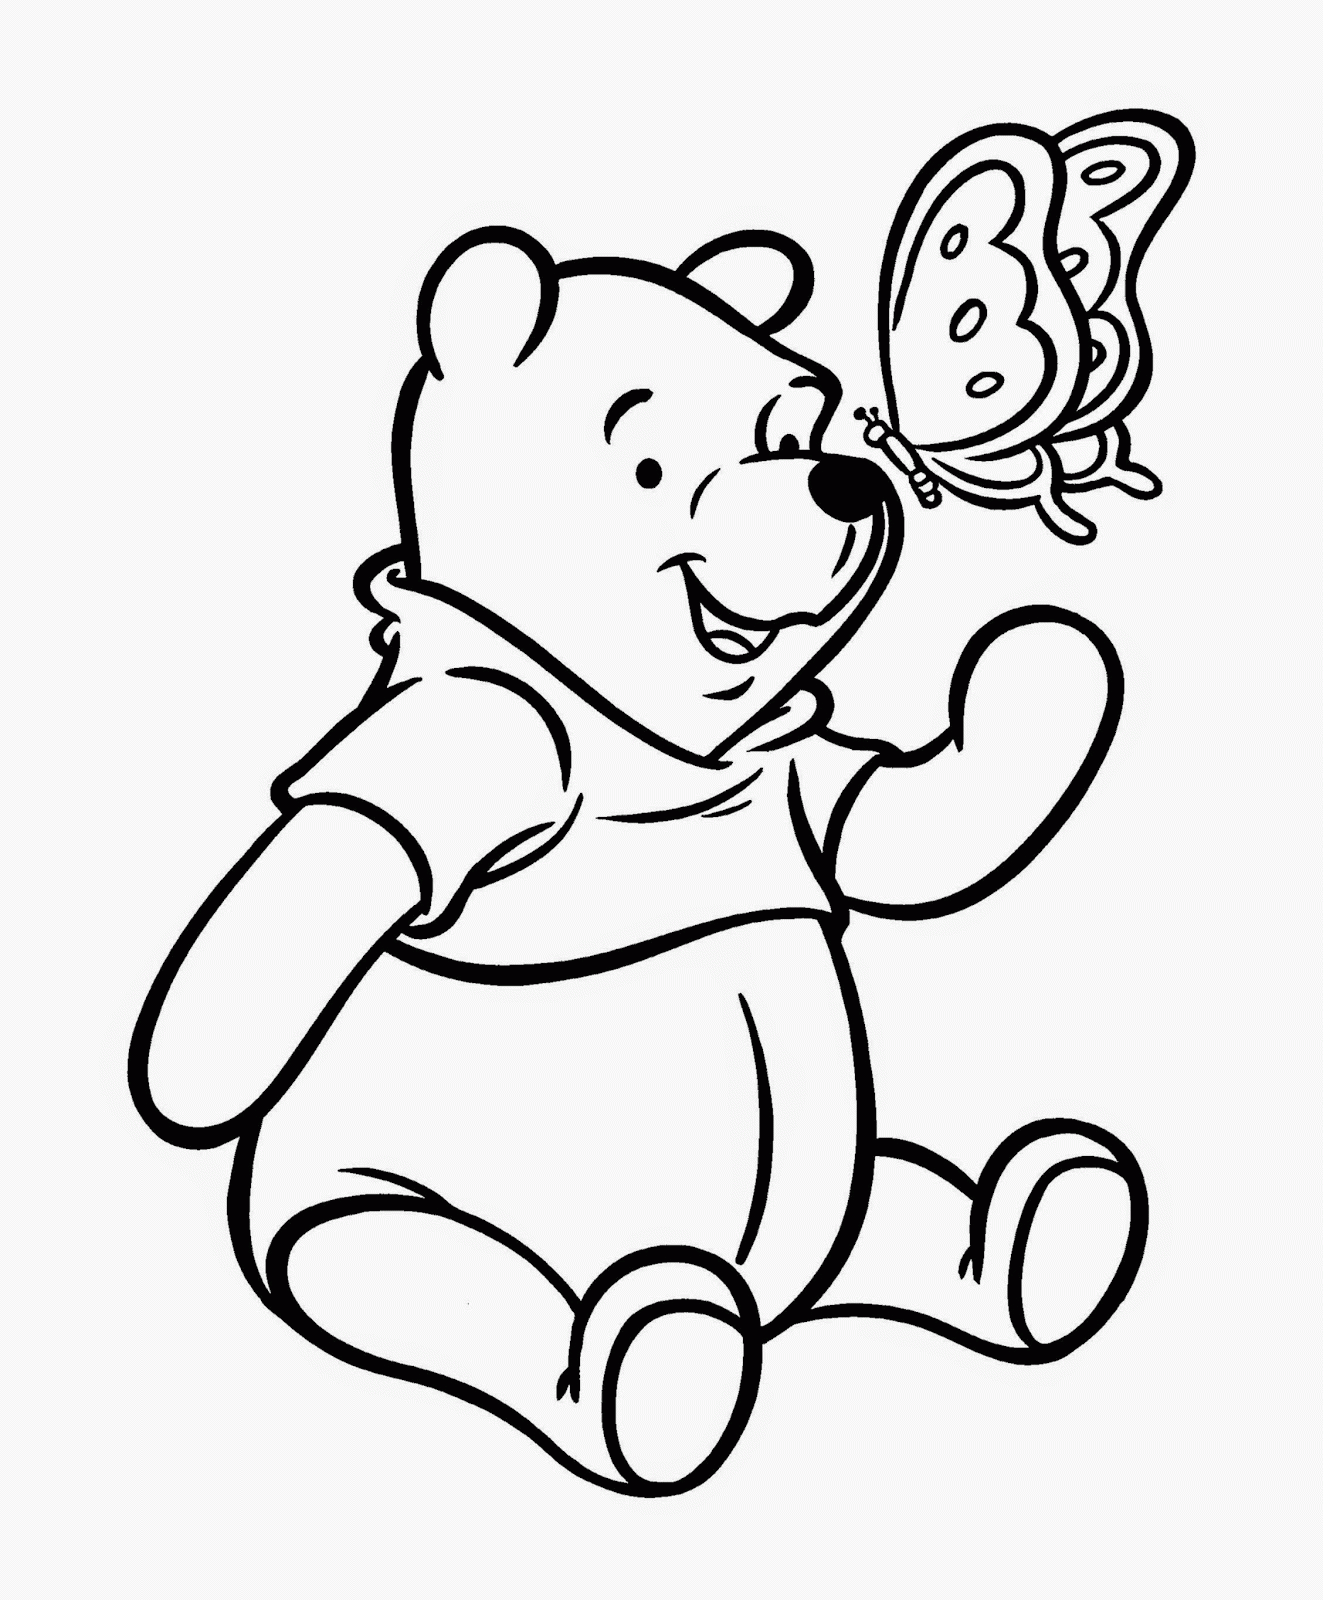 winnie the pooh coloring book download free tigger from winnie the pooh coloring pages download pooh coloring winnie the book download 